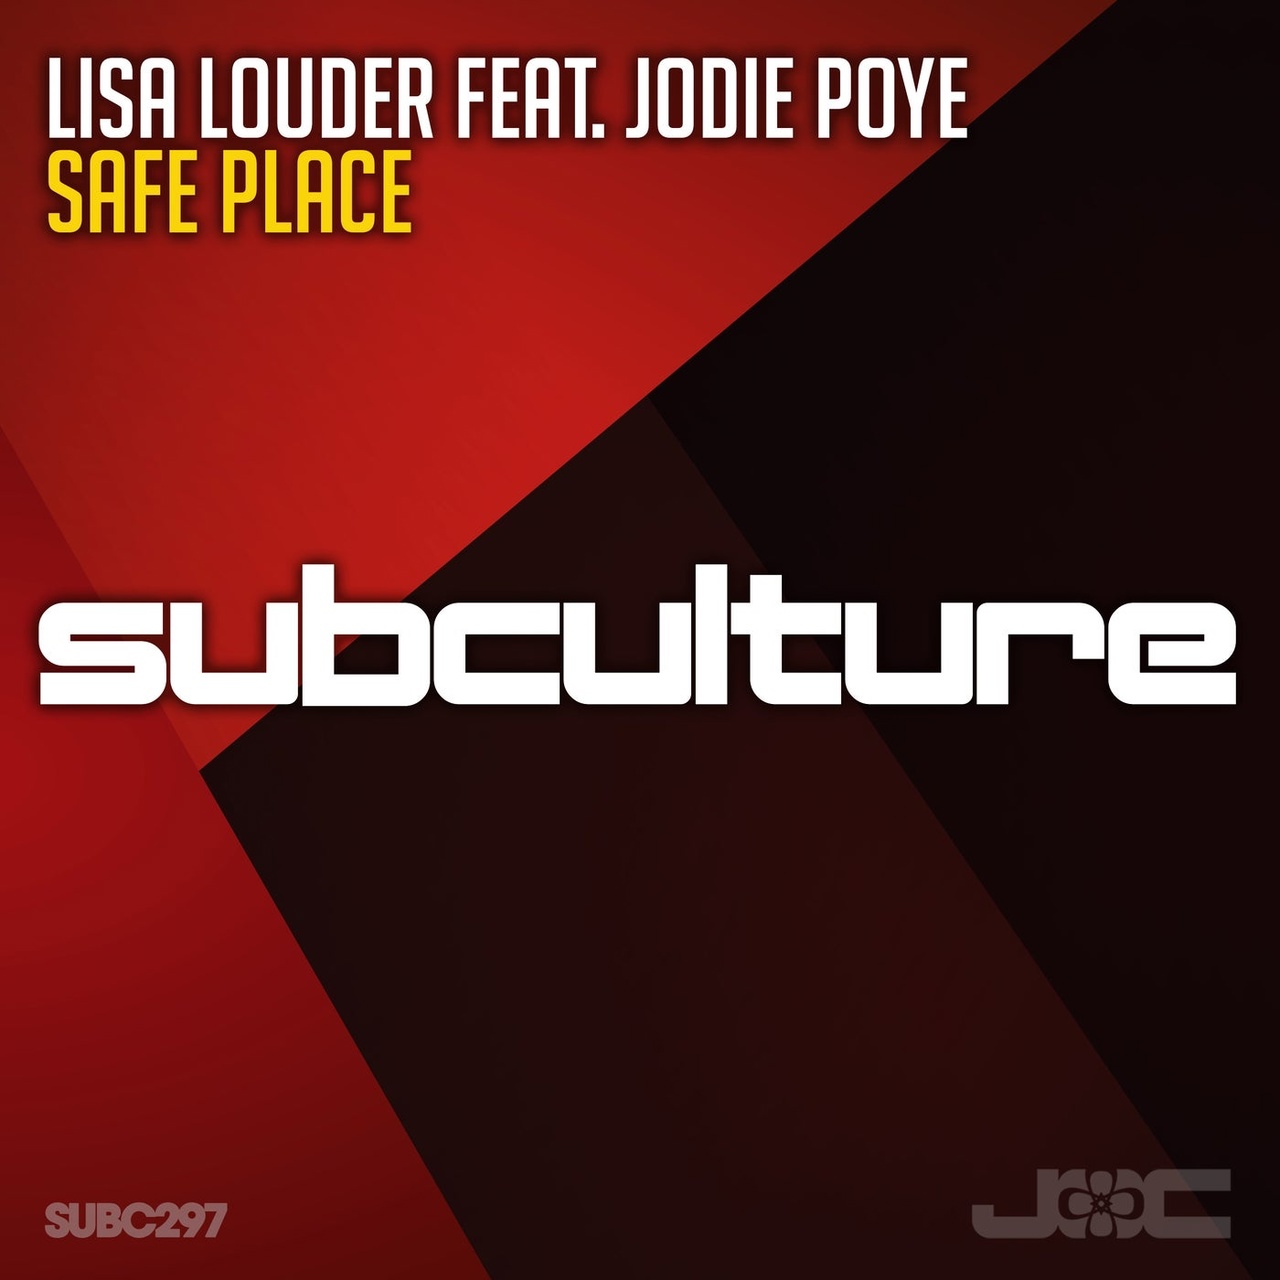 Lisa Louder Feat. Jody Poye - Safe Place (Extended Mix)